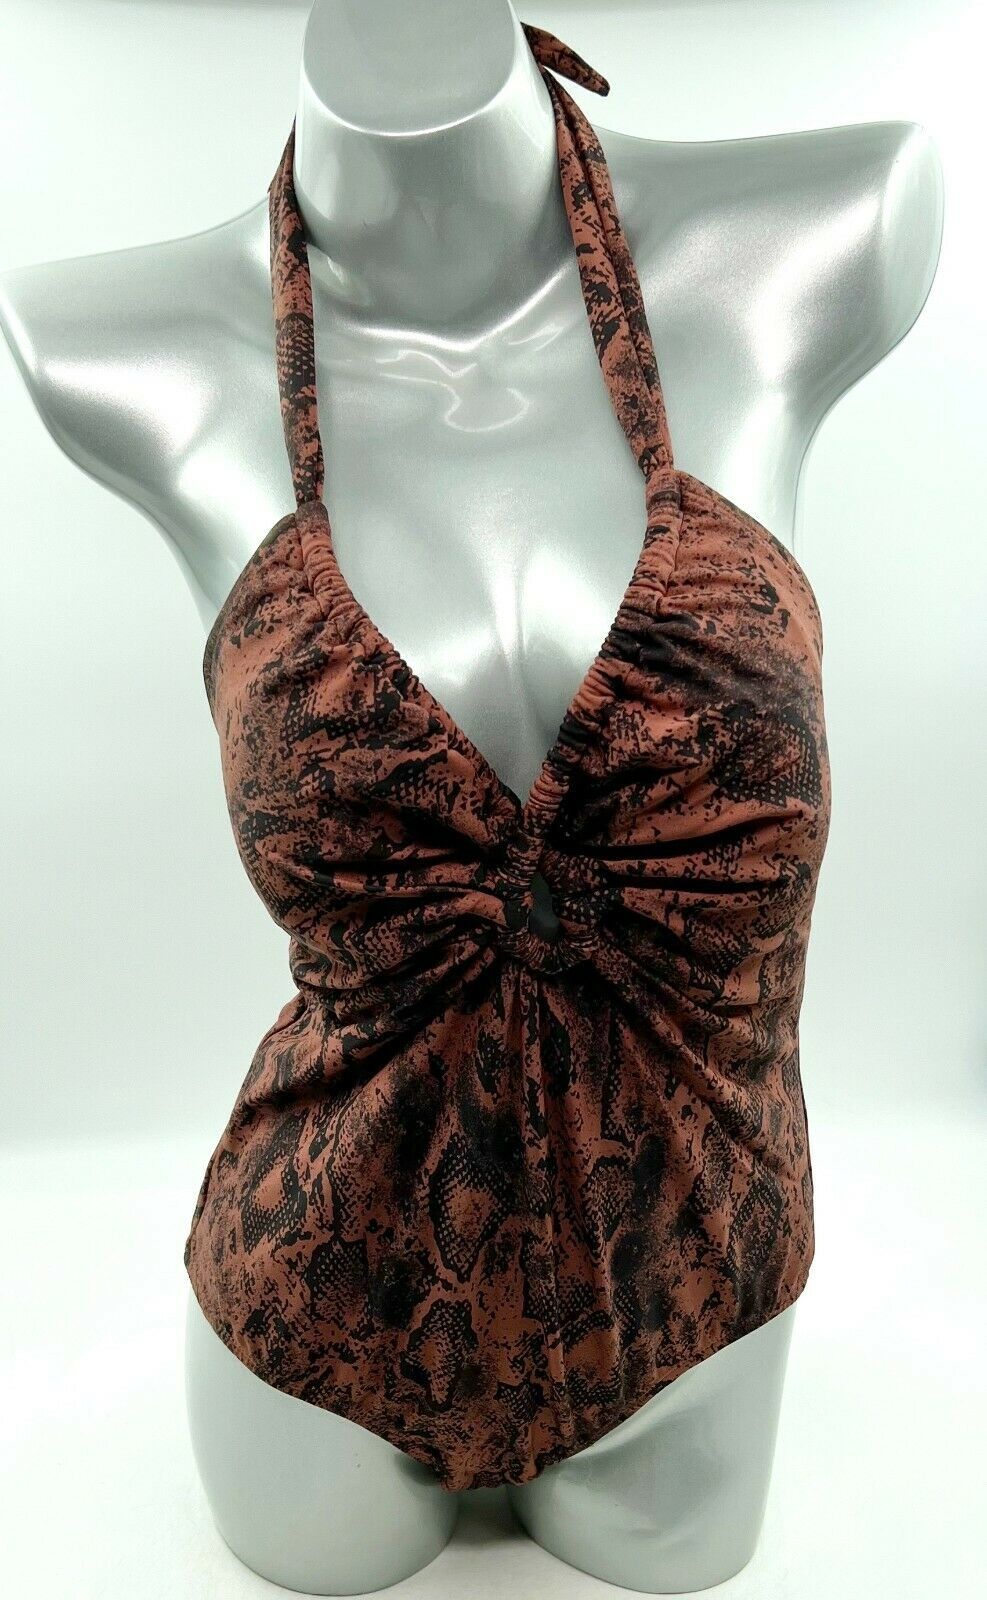 Primary image for Kona Sol Plus Size Swimsuit Brown Black Snake Print Halter Keyhole One Piece NEW